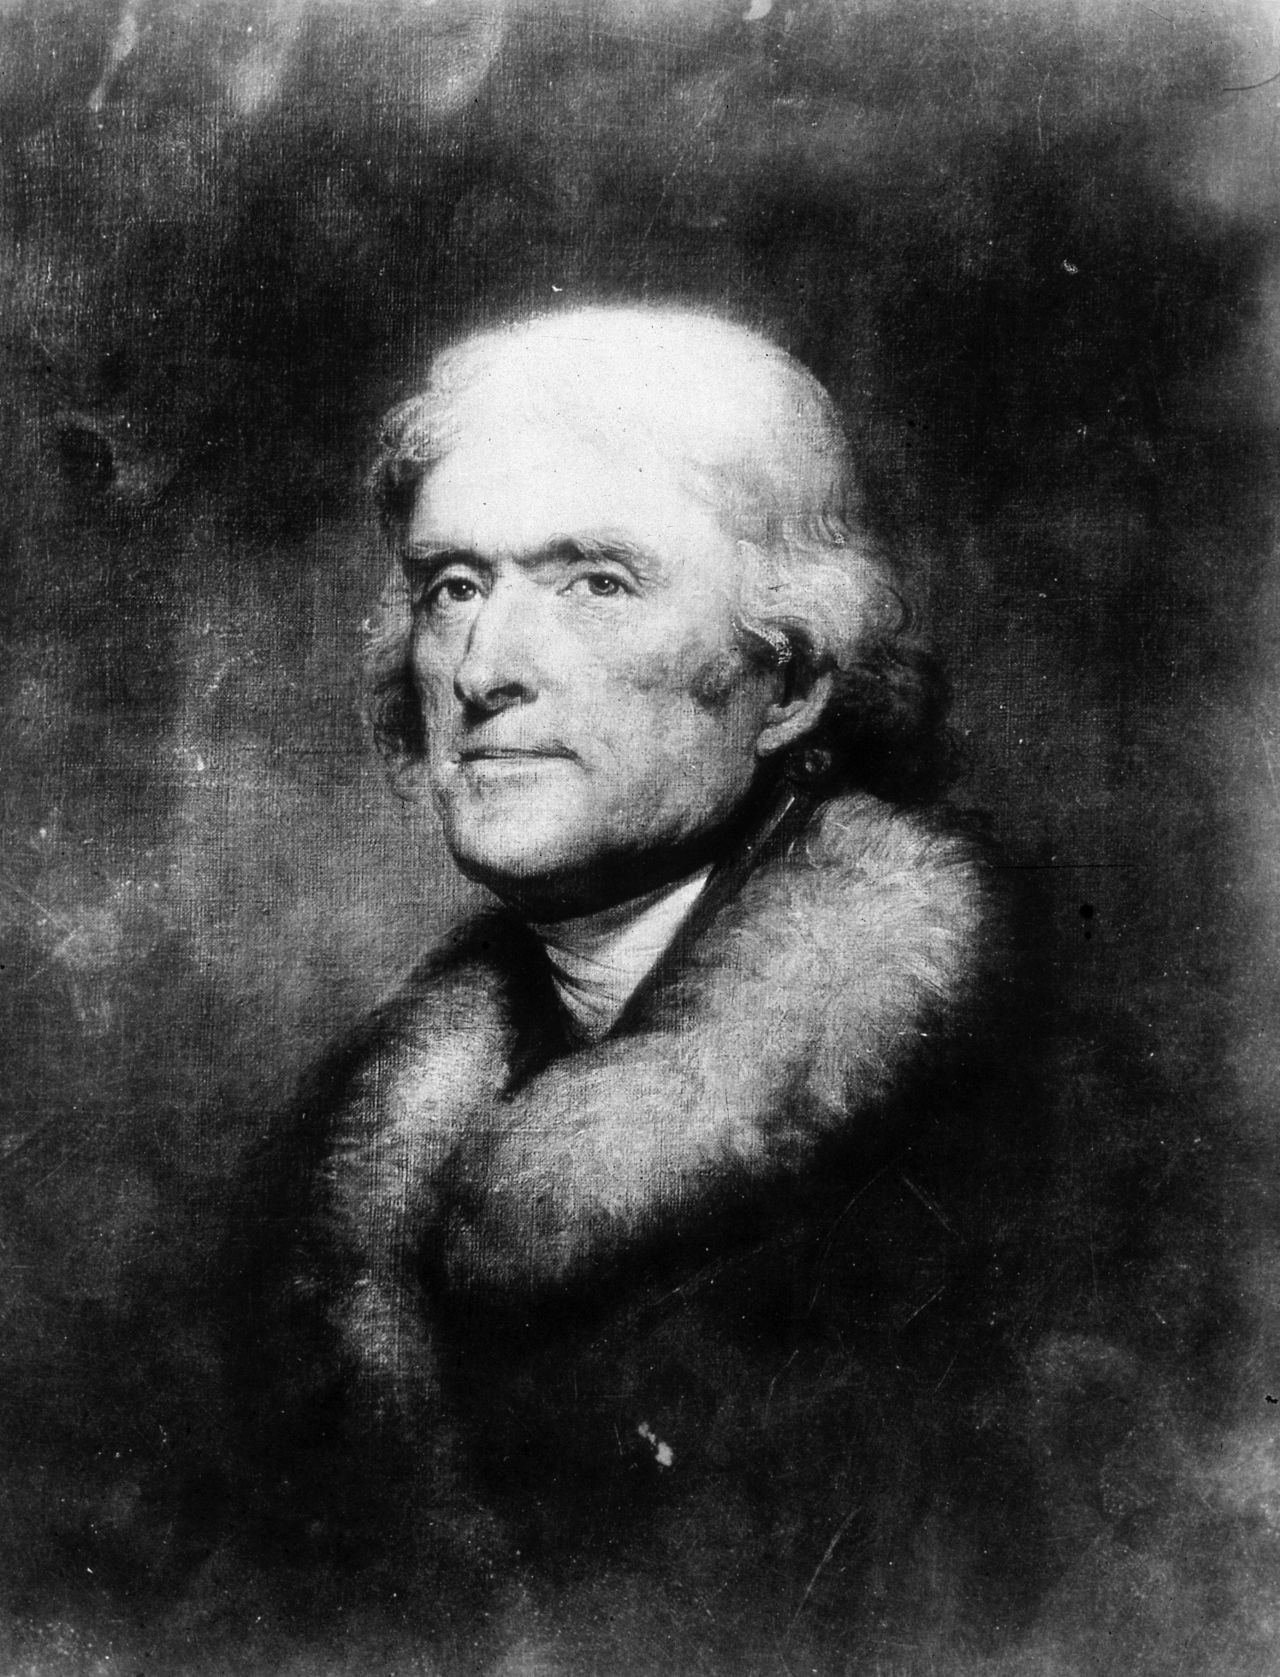 Thomas Jefferson doubled the size of the United States with the Louisiana Purchase in 1803.